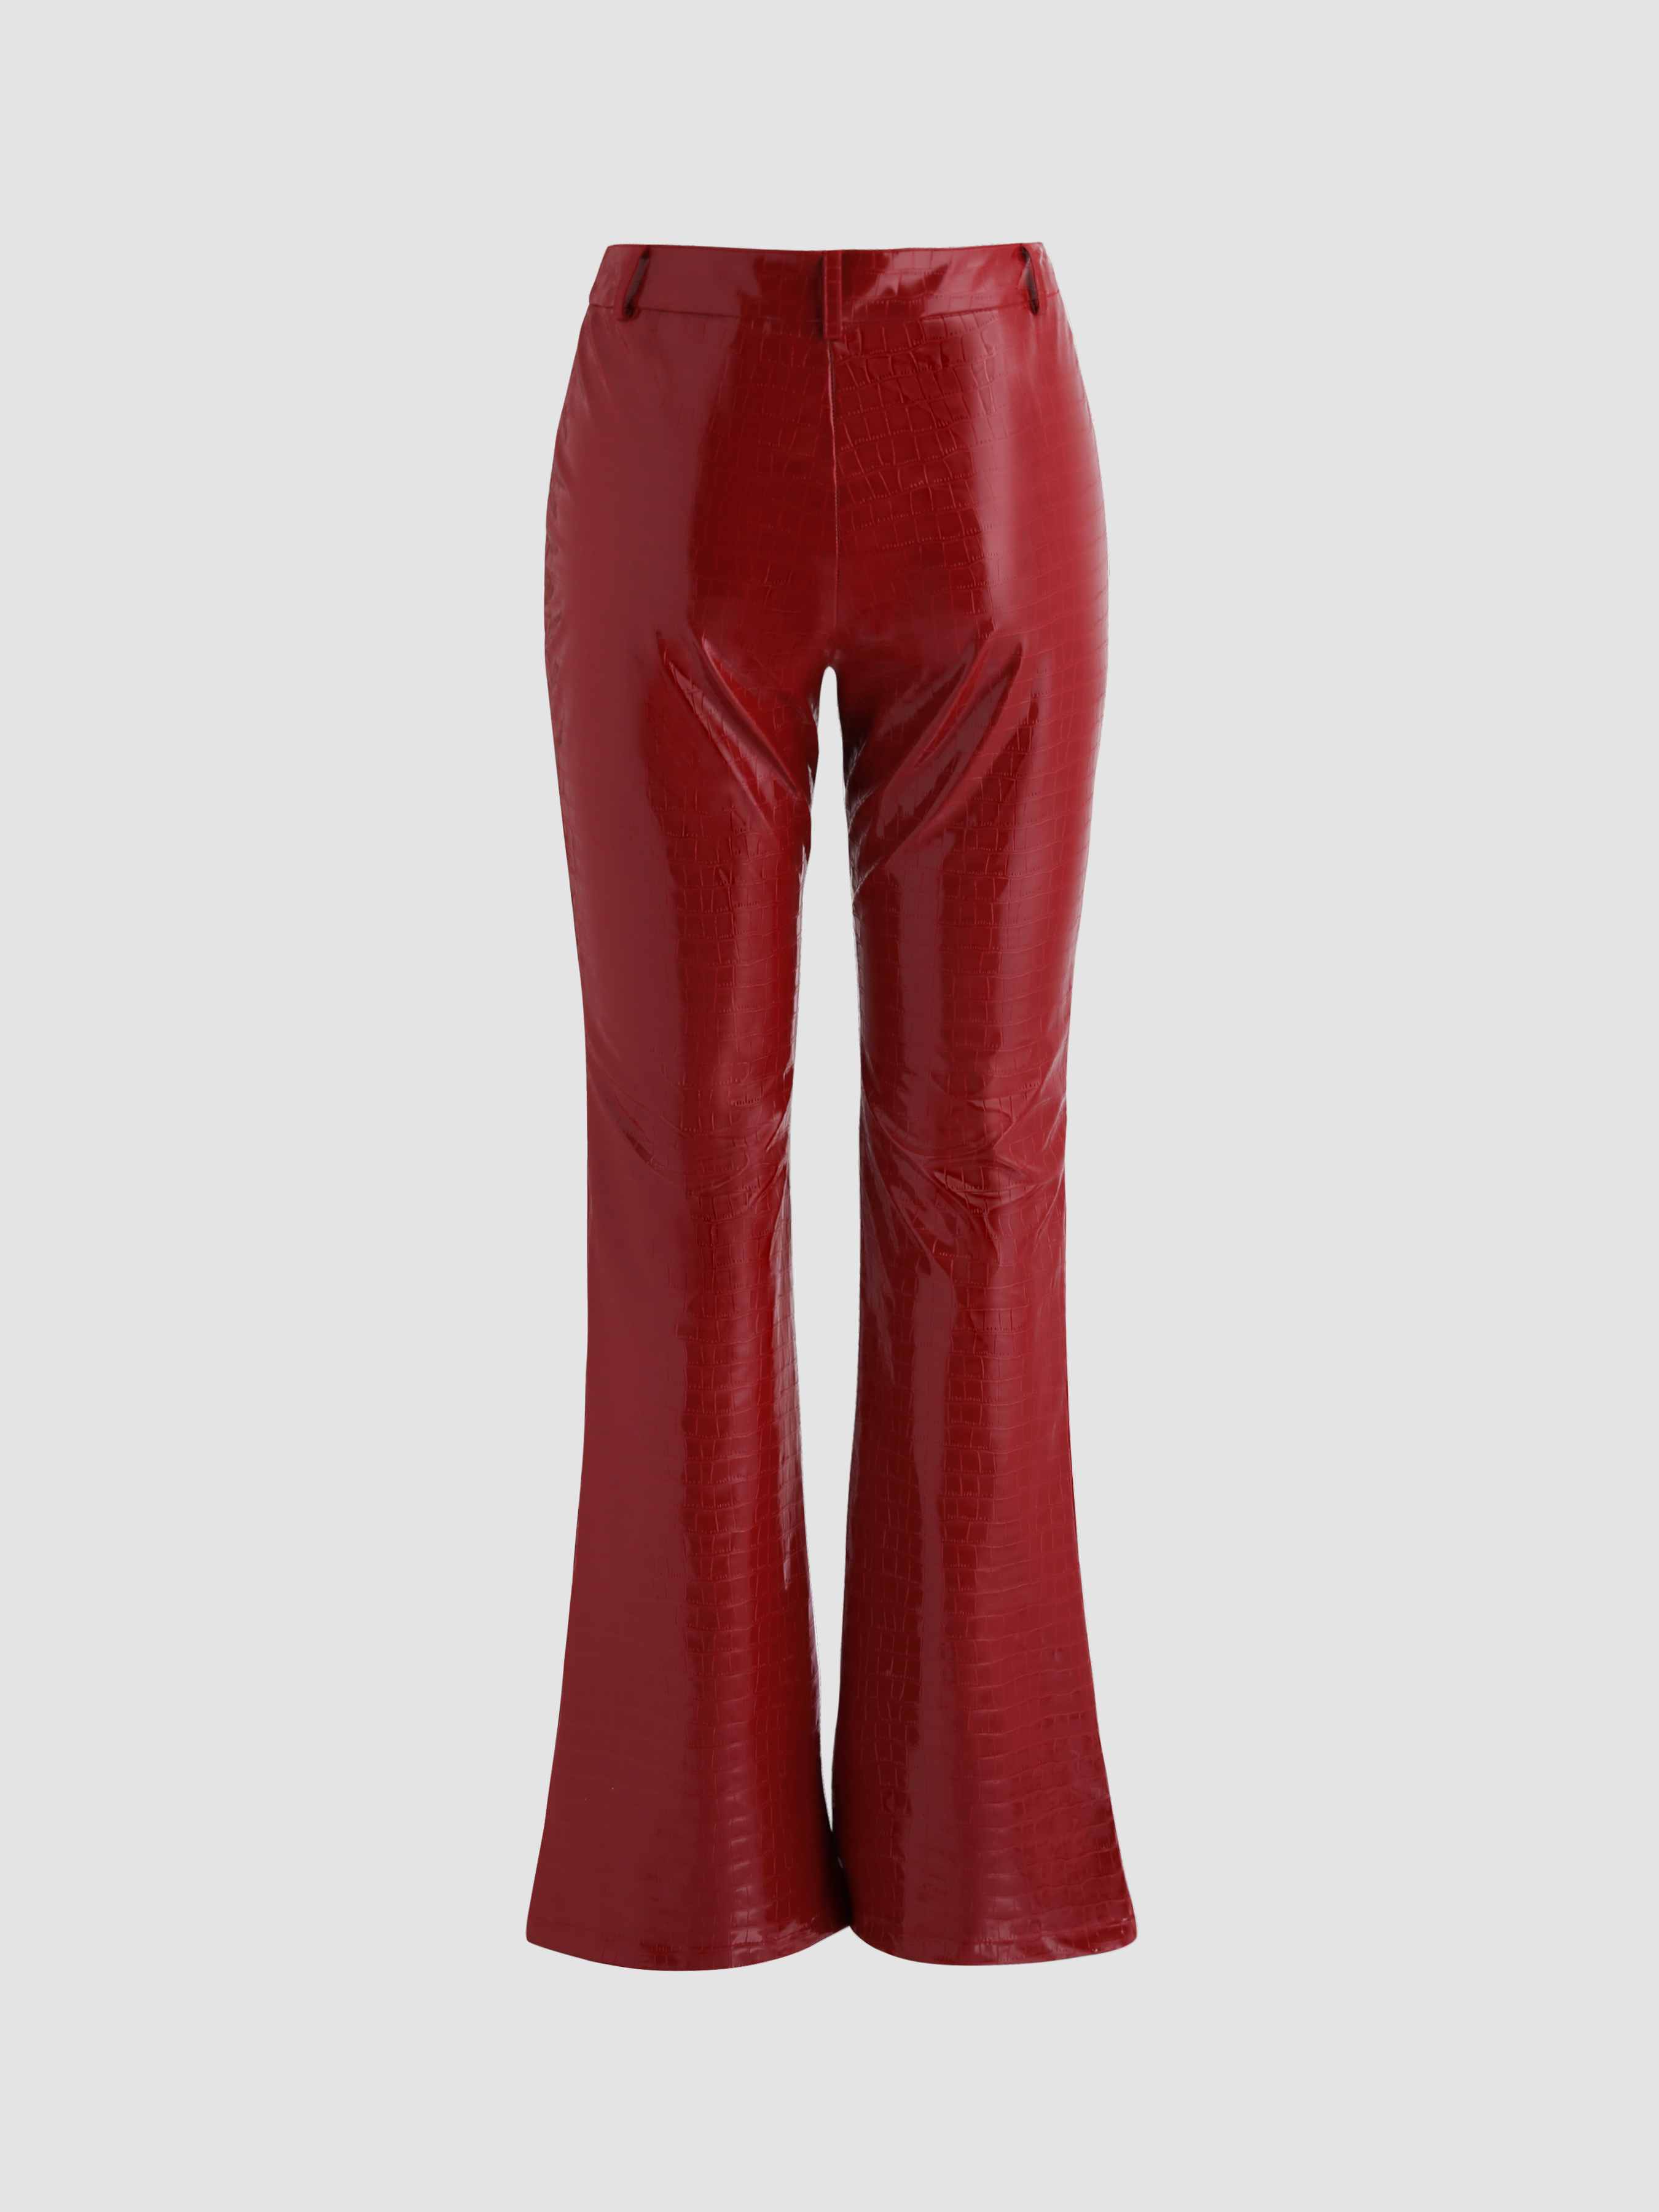 Cherry Red Faux Crocodile Leather Pants